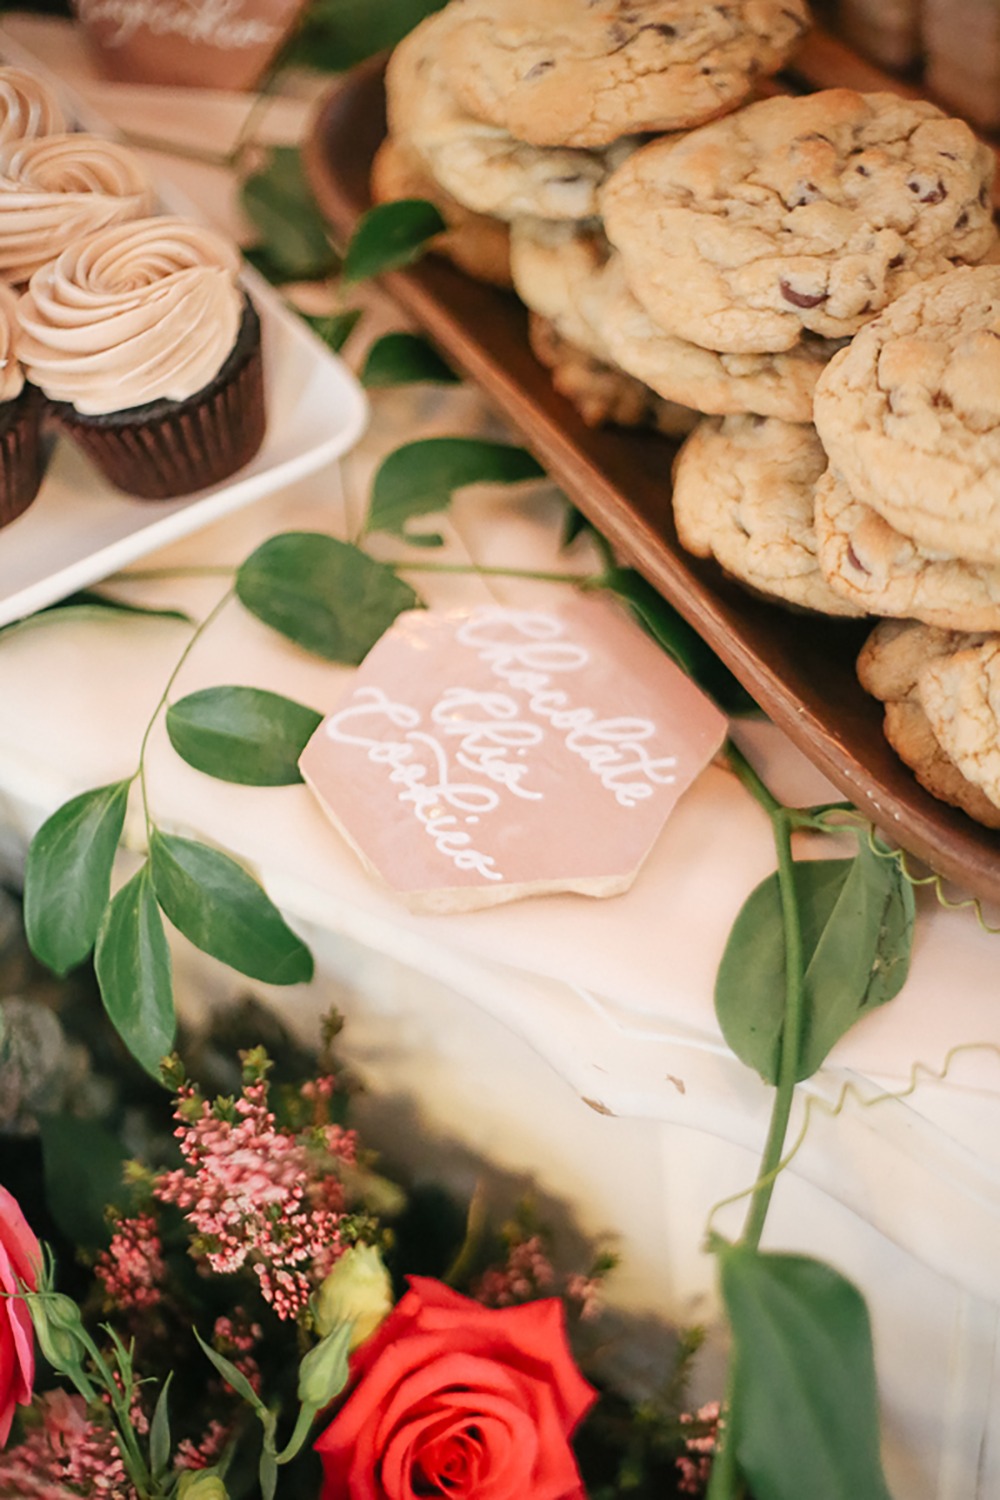 tile title cards for your dessert table